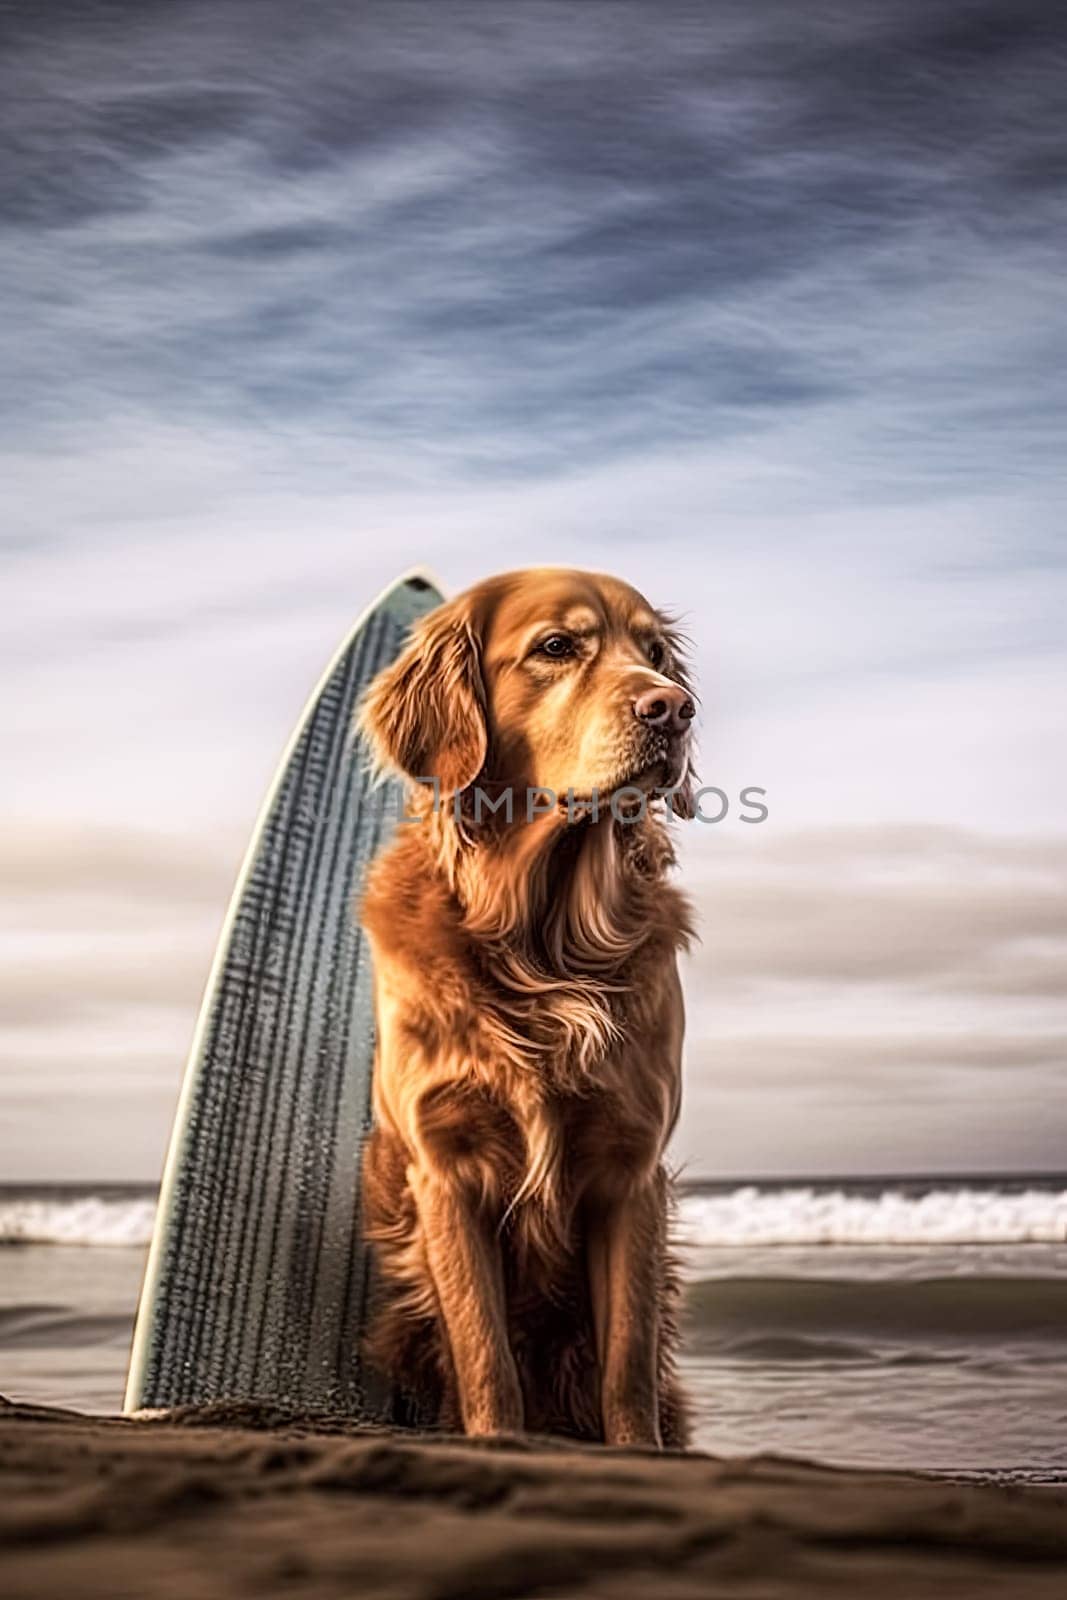 A dog is sitting on a surfboard with a blue collar. The dog is looking at the camera